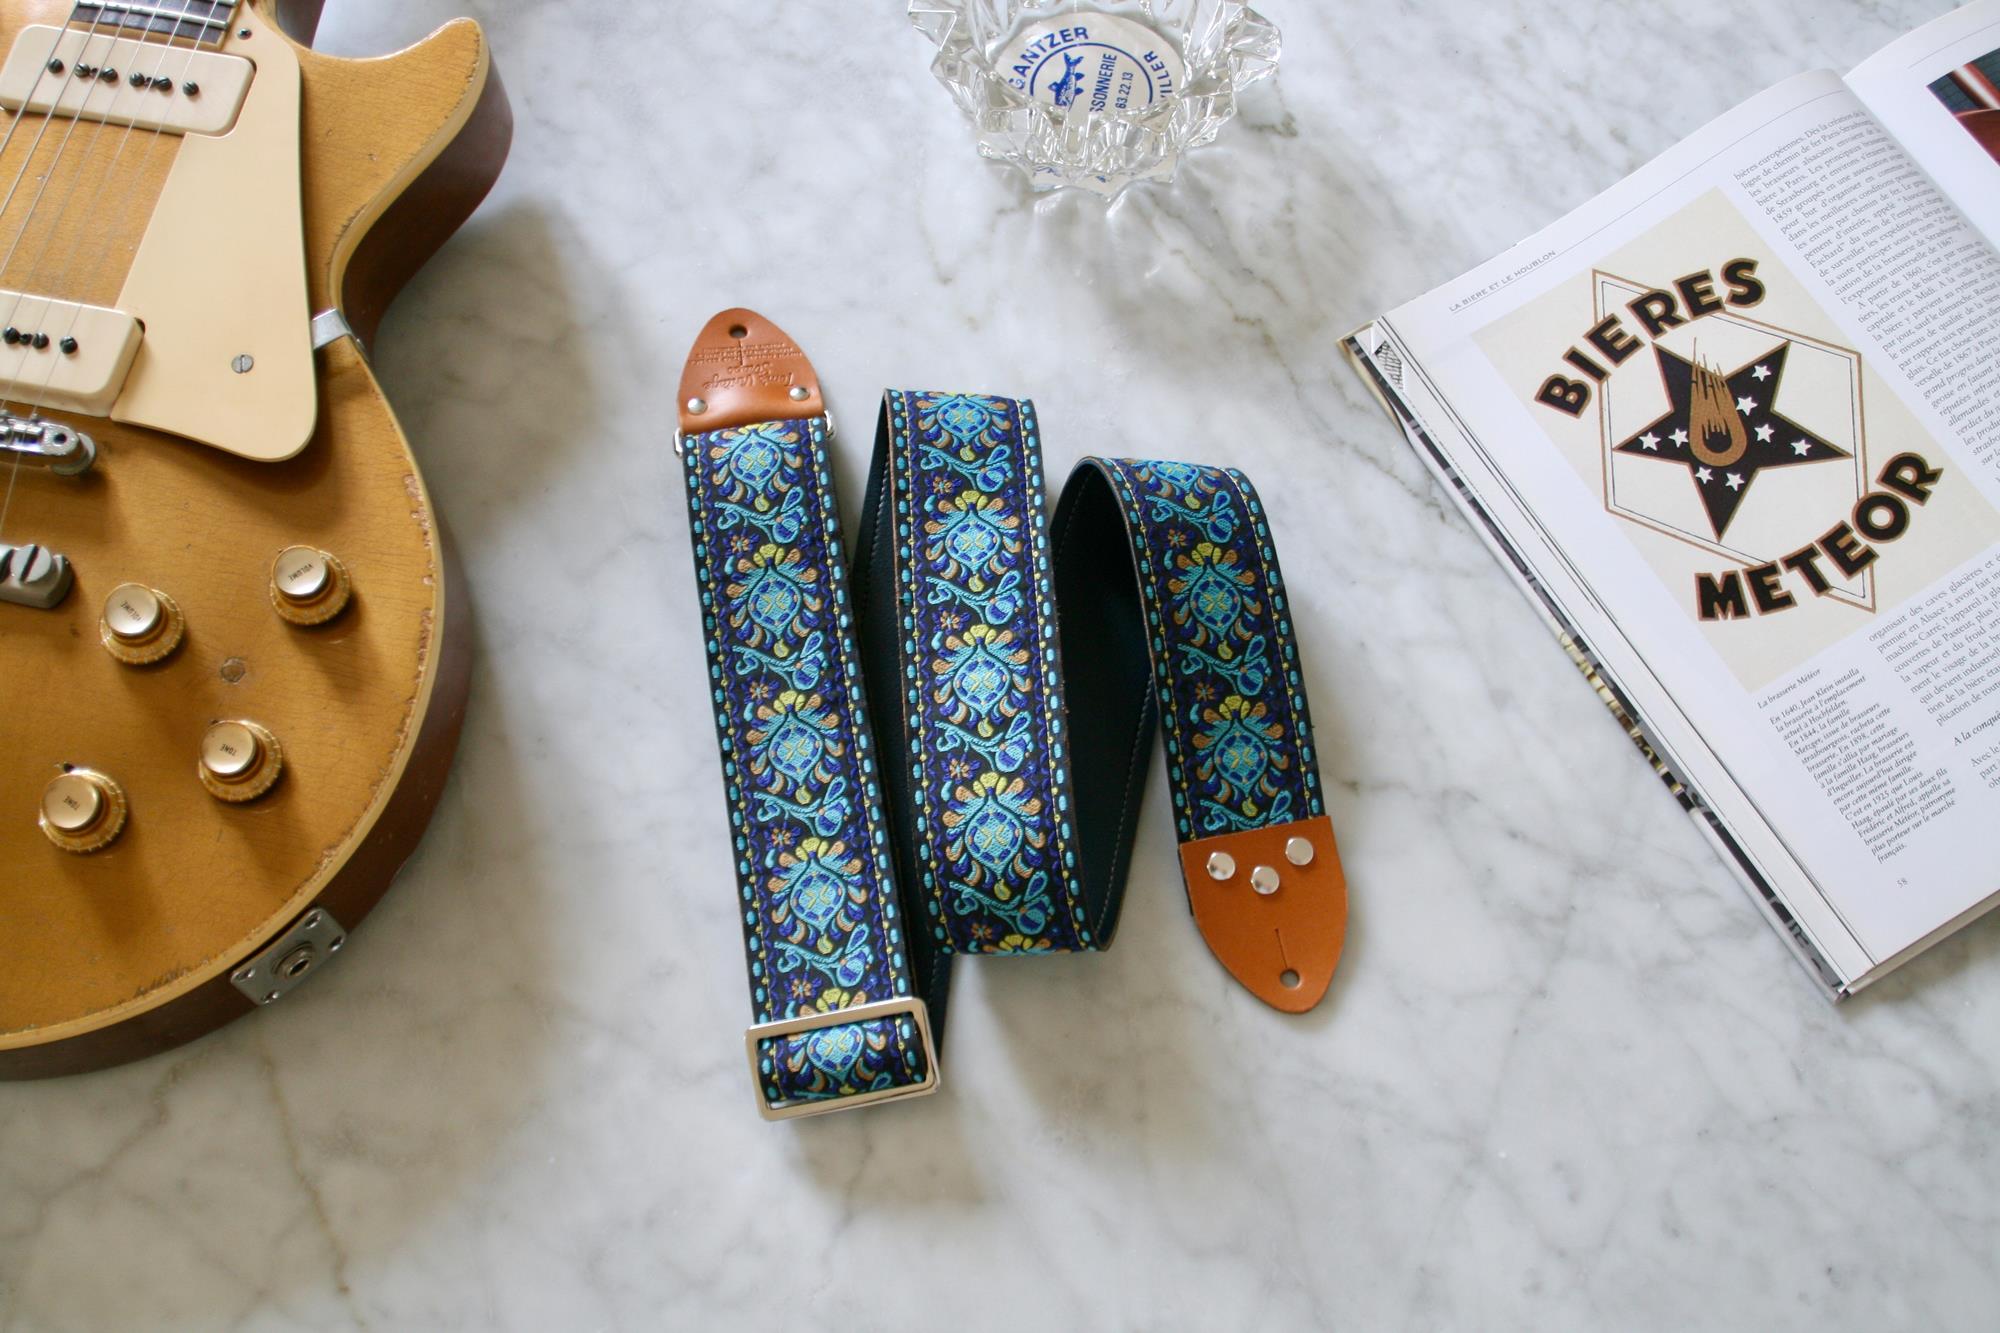 https://theguitardivision.com/photos/products/large/blue-peacock-guitar-bass-hippie-strap-tom-s-vintage-straps_638201055982854194.jpg